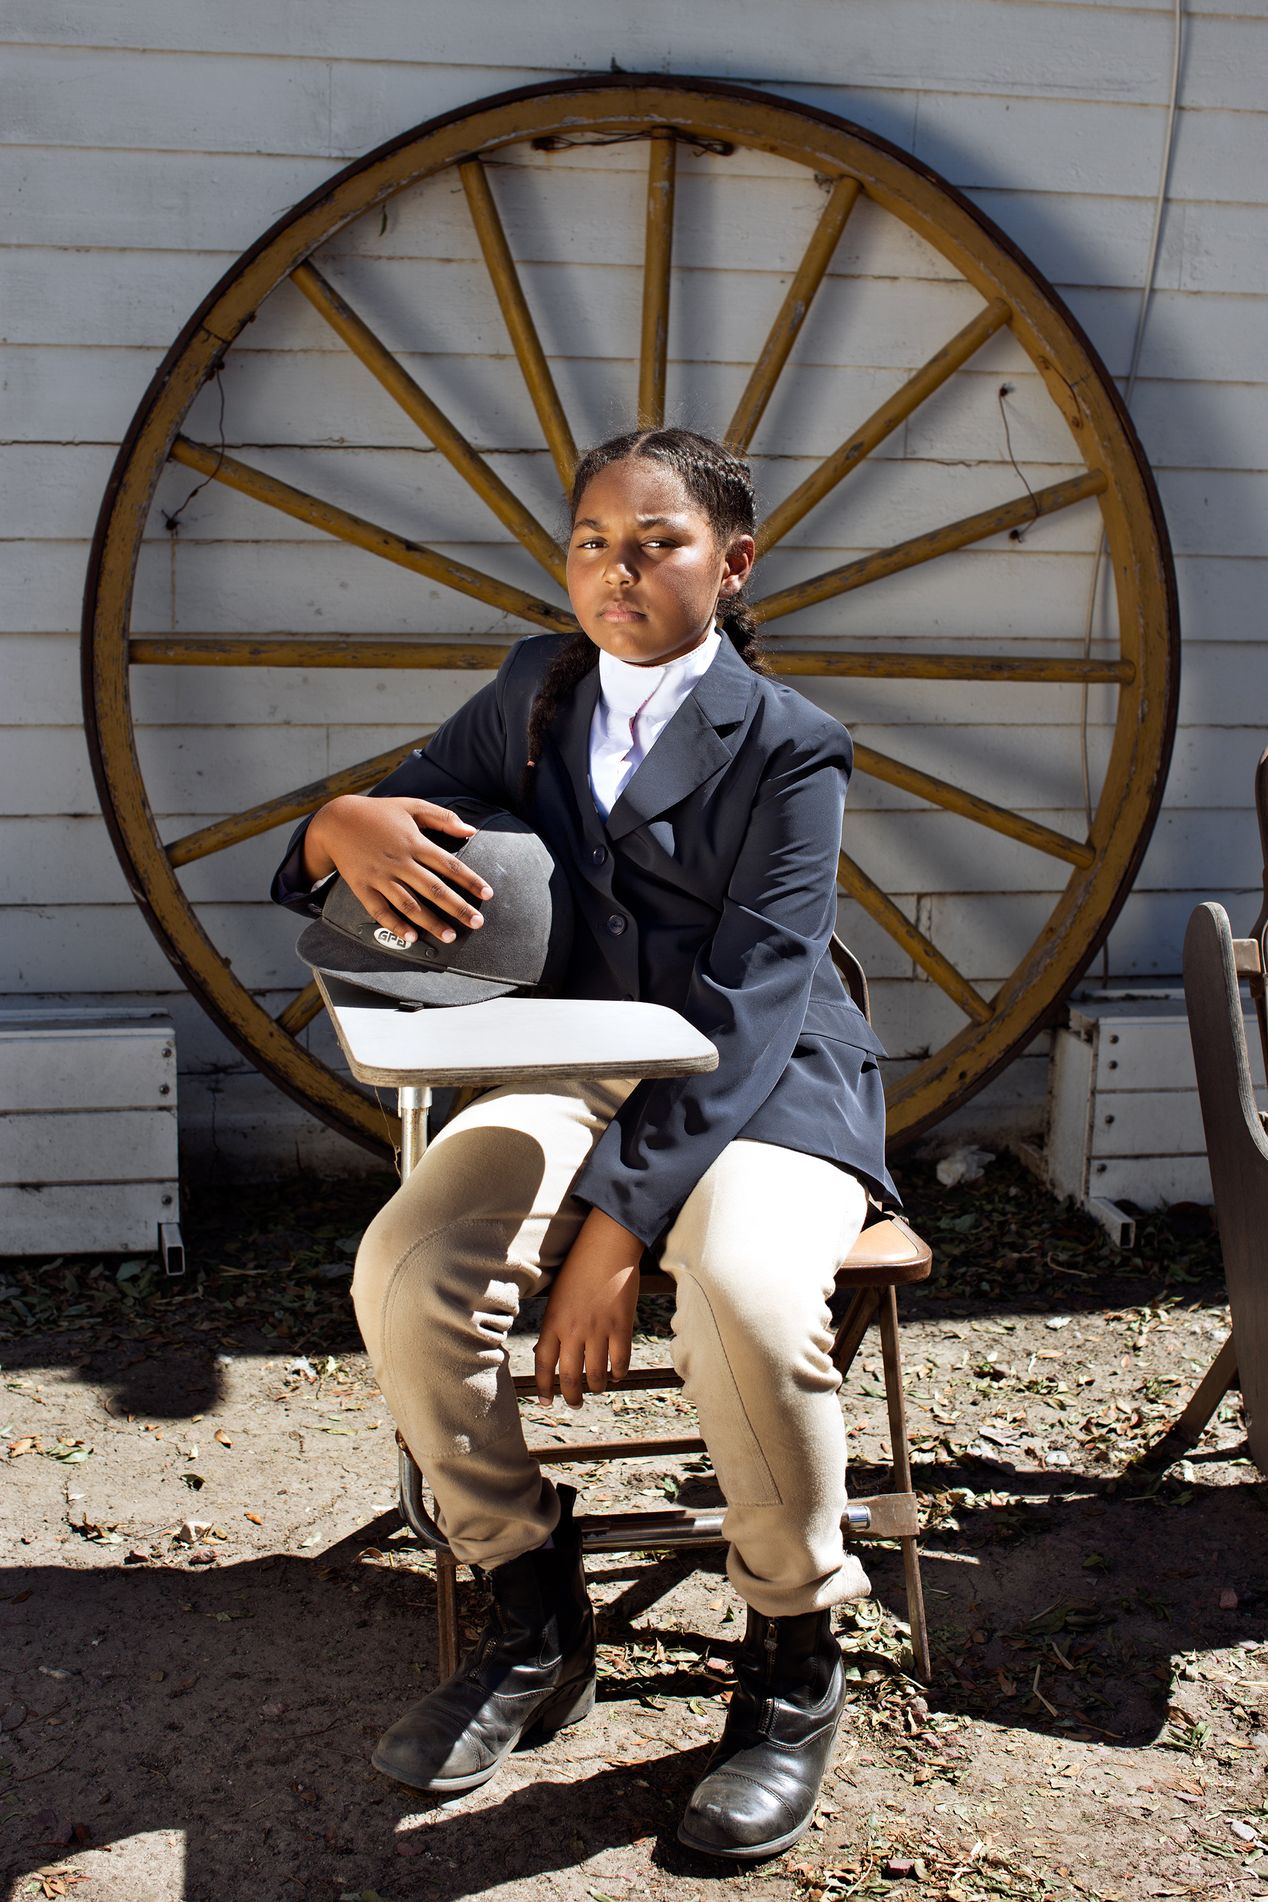 A young female equestrian sitting next to a wooden wheel.,  Ilona Szwarc, editorial photographer, Los Angeles.  